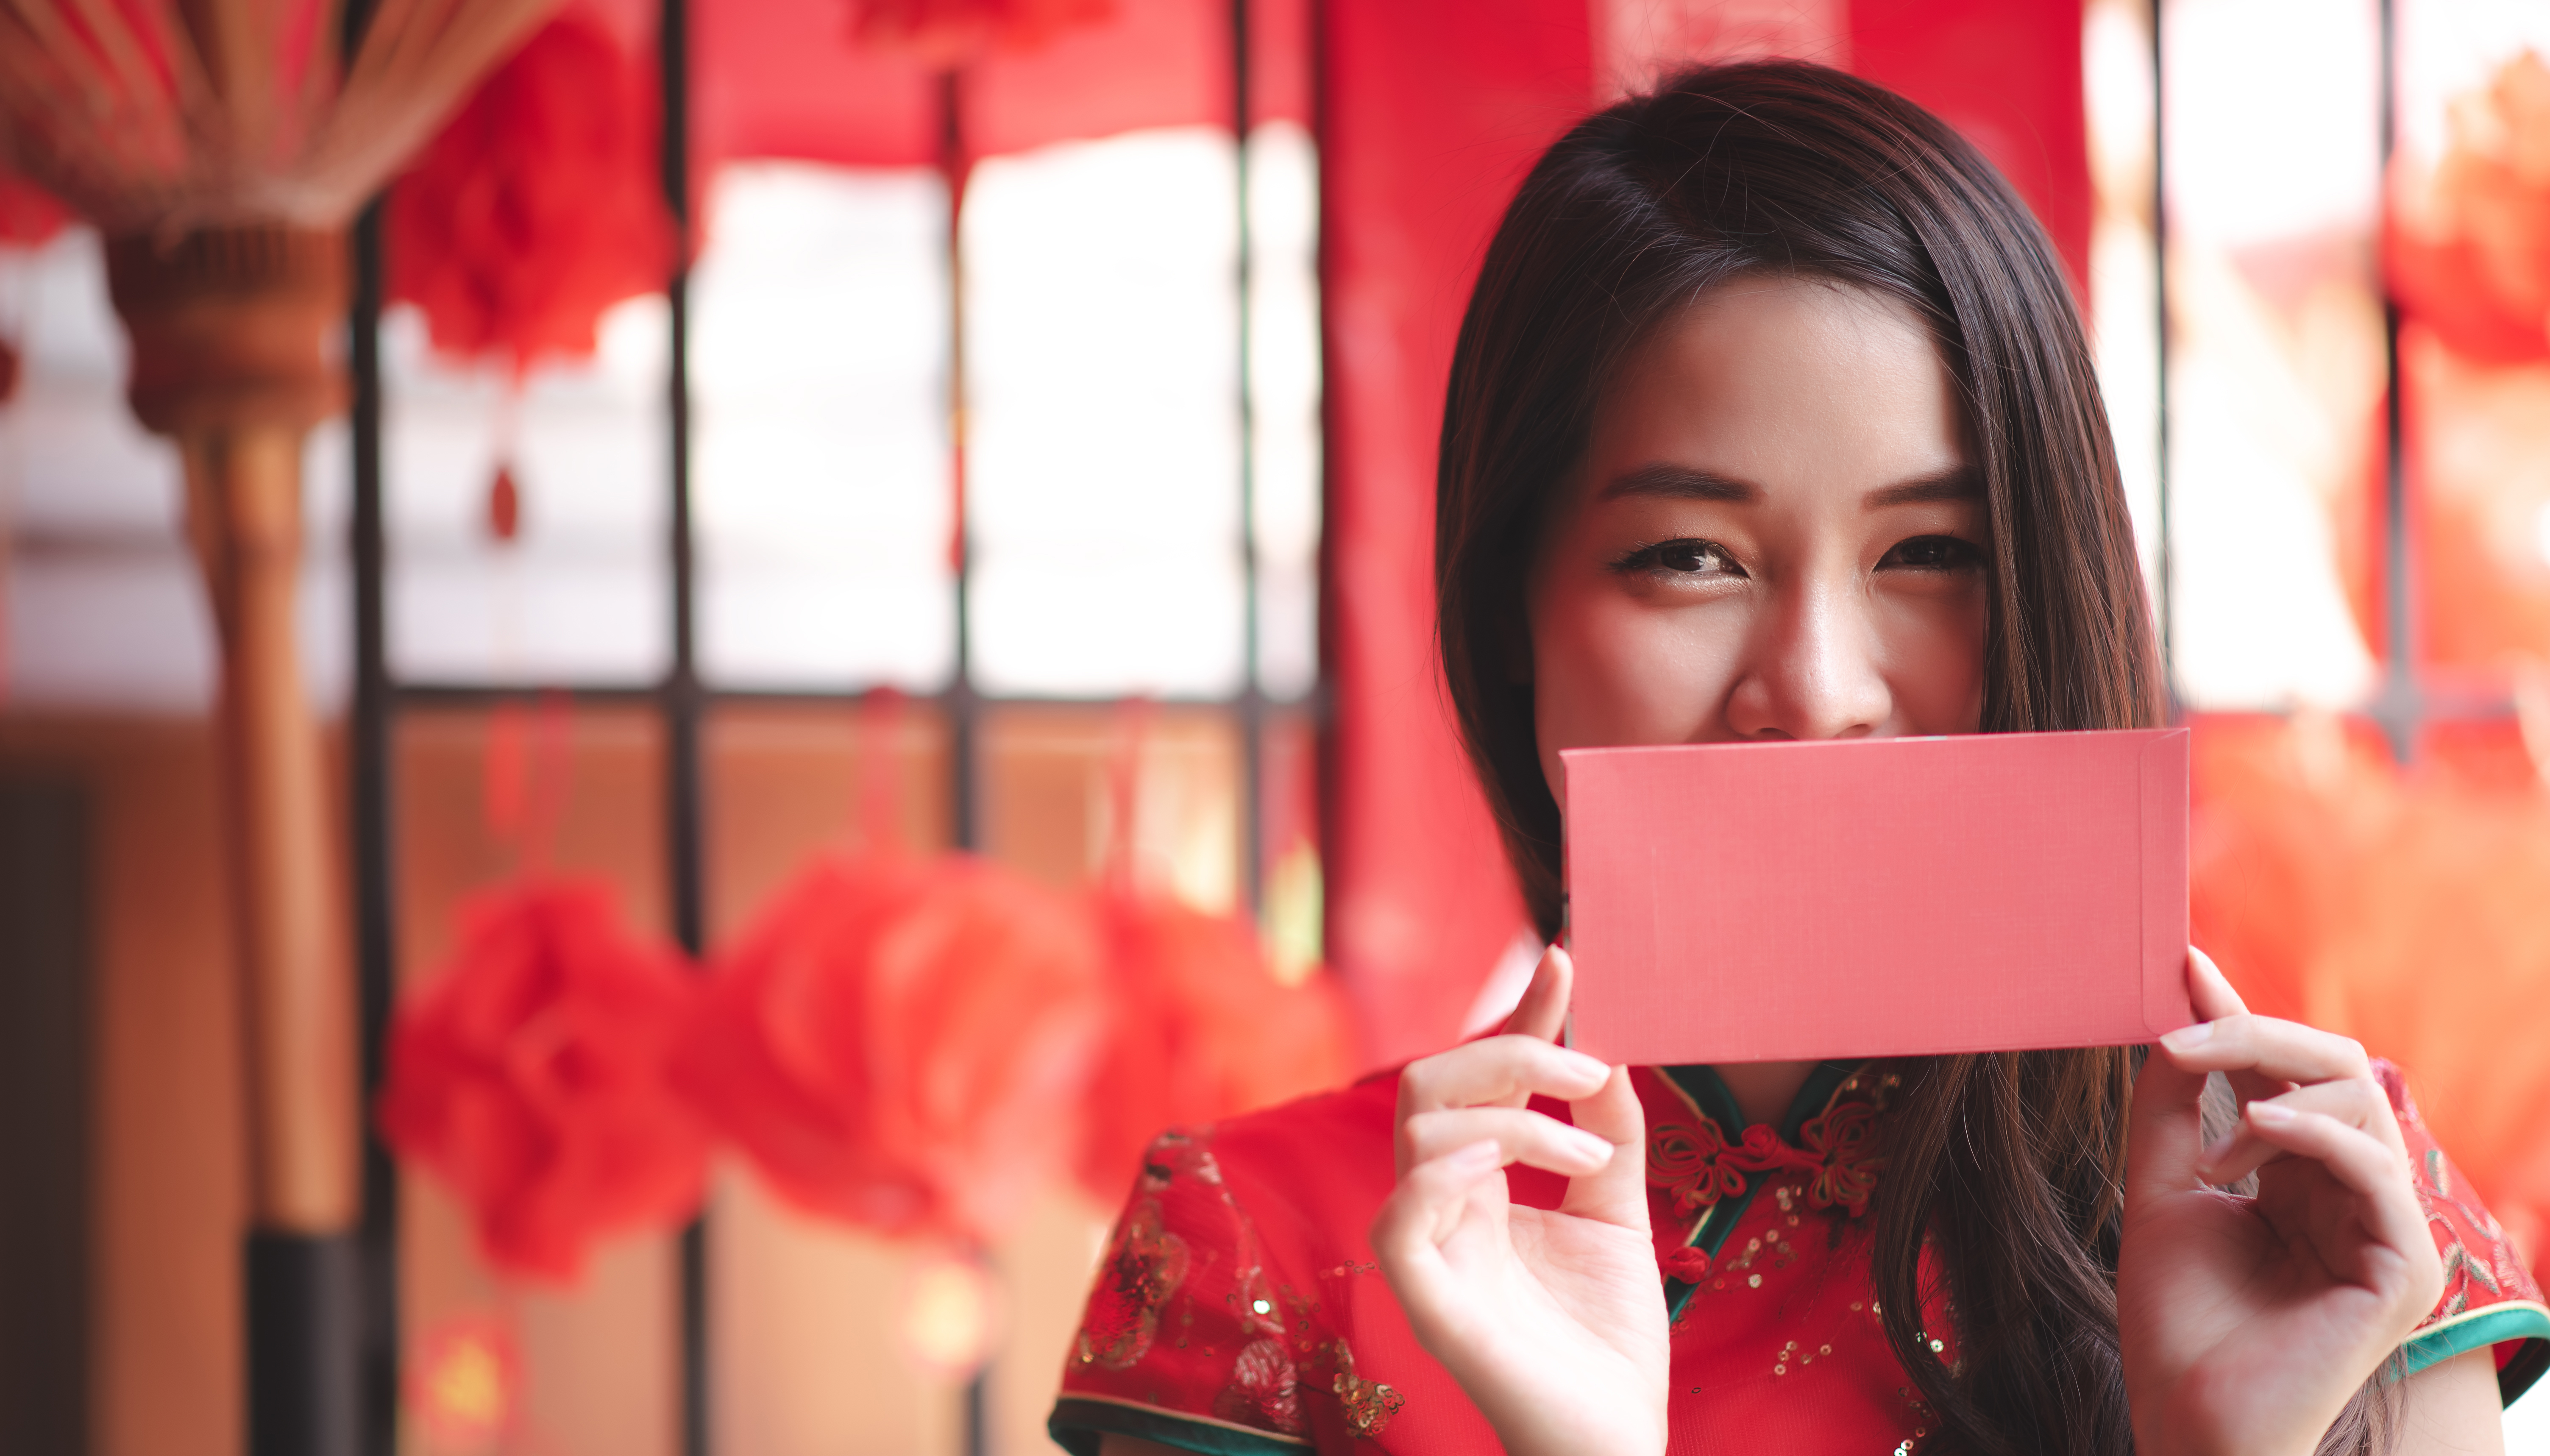 15 Facts About Chinese New Year